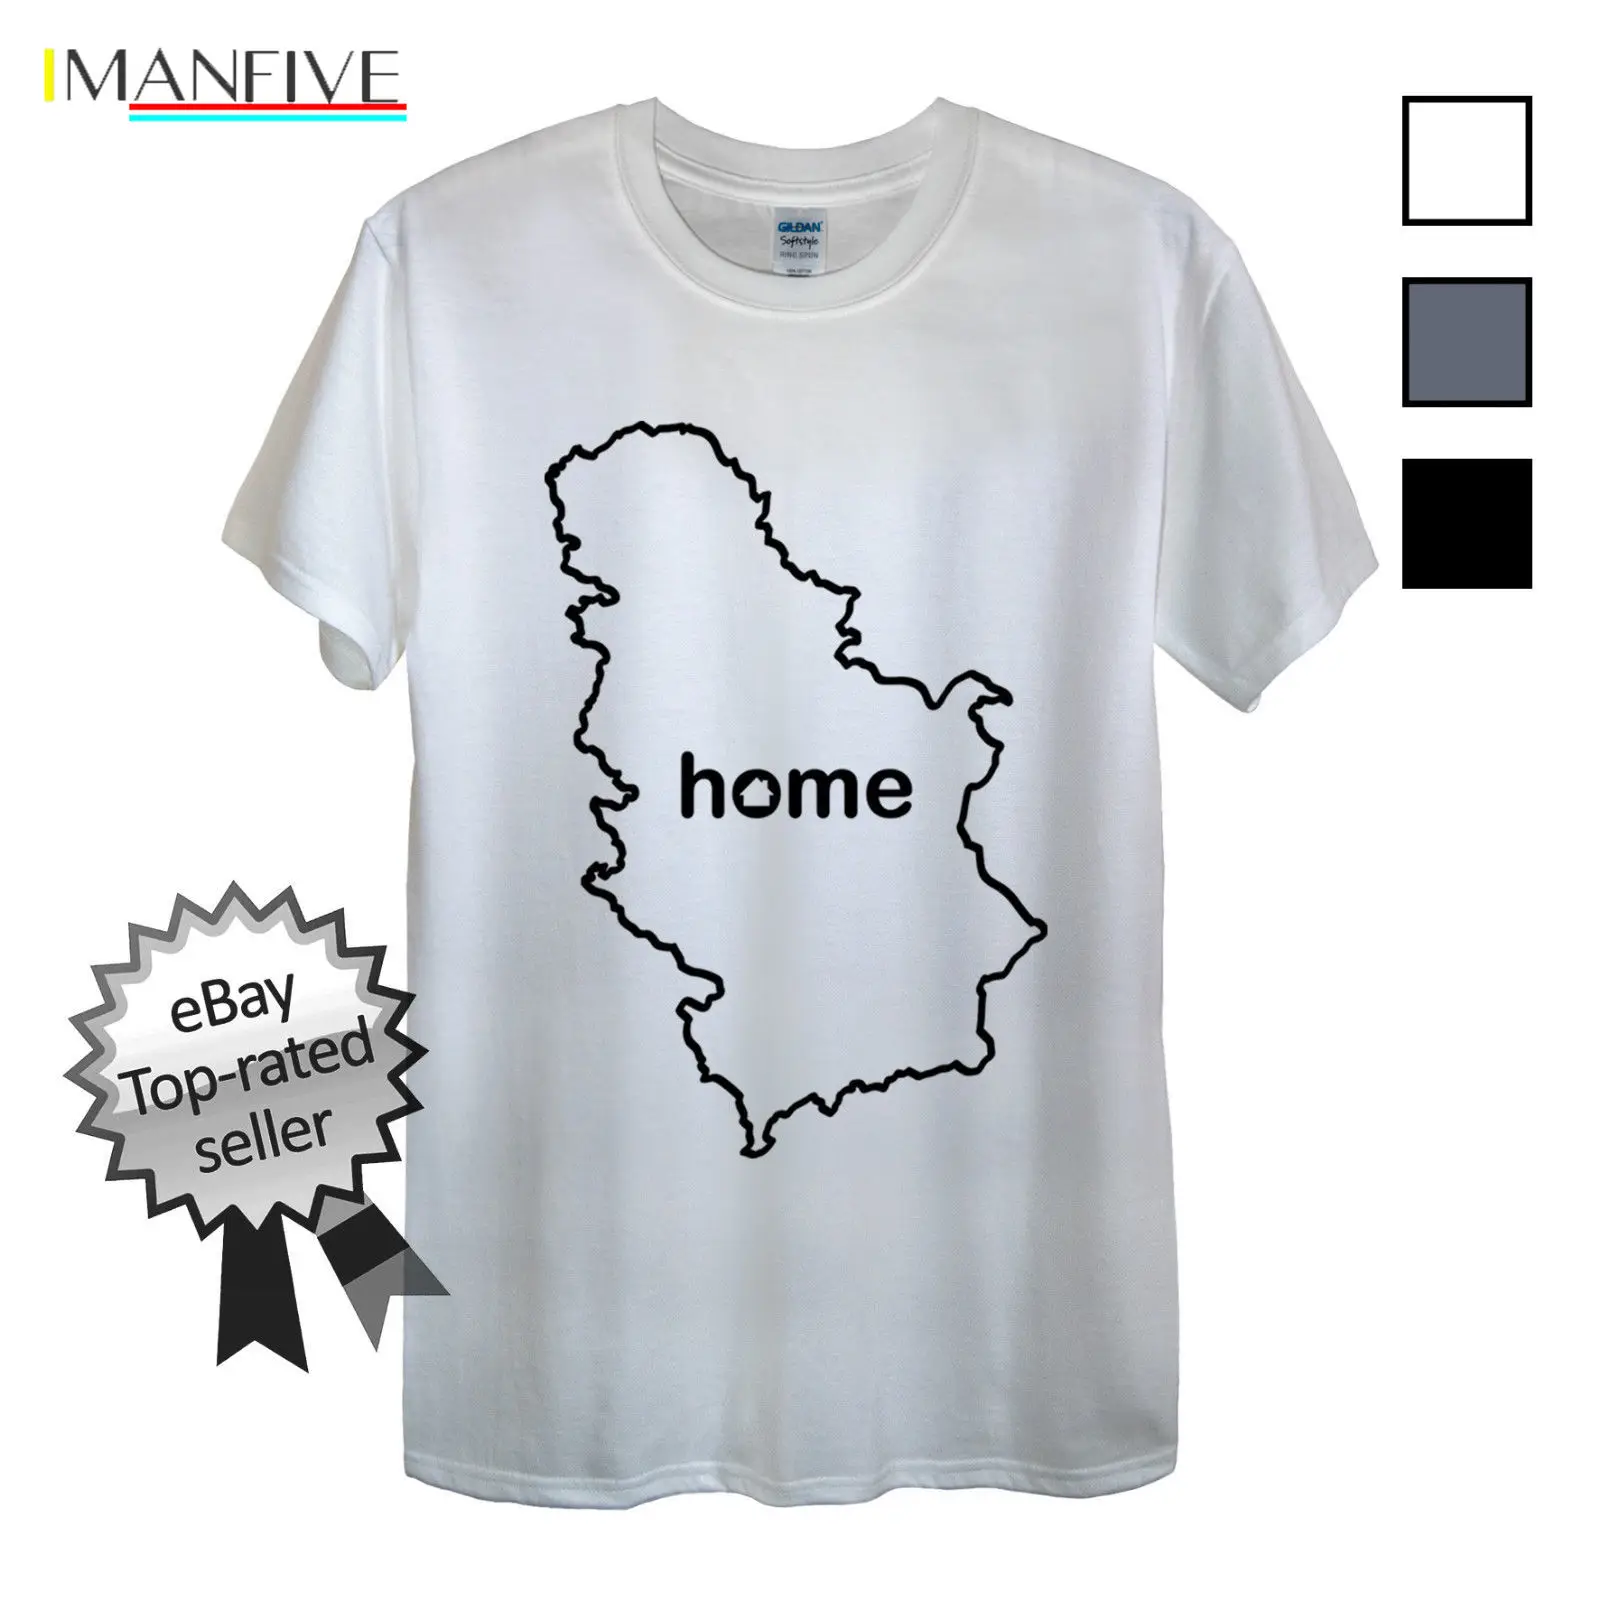 

Short-Sleeved Cotton T-Shirt SERBIA T-Shirt FIND YOUR OWN Country Men OR Women's Flag Map Belgrade Clothing O-Neck T Shirt Men